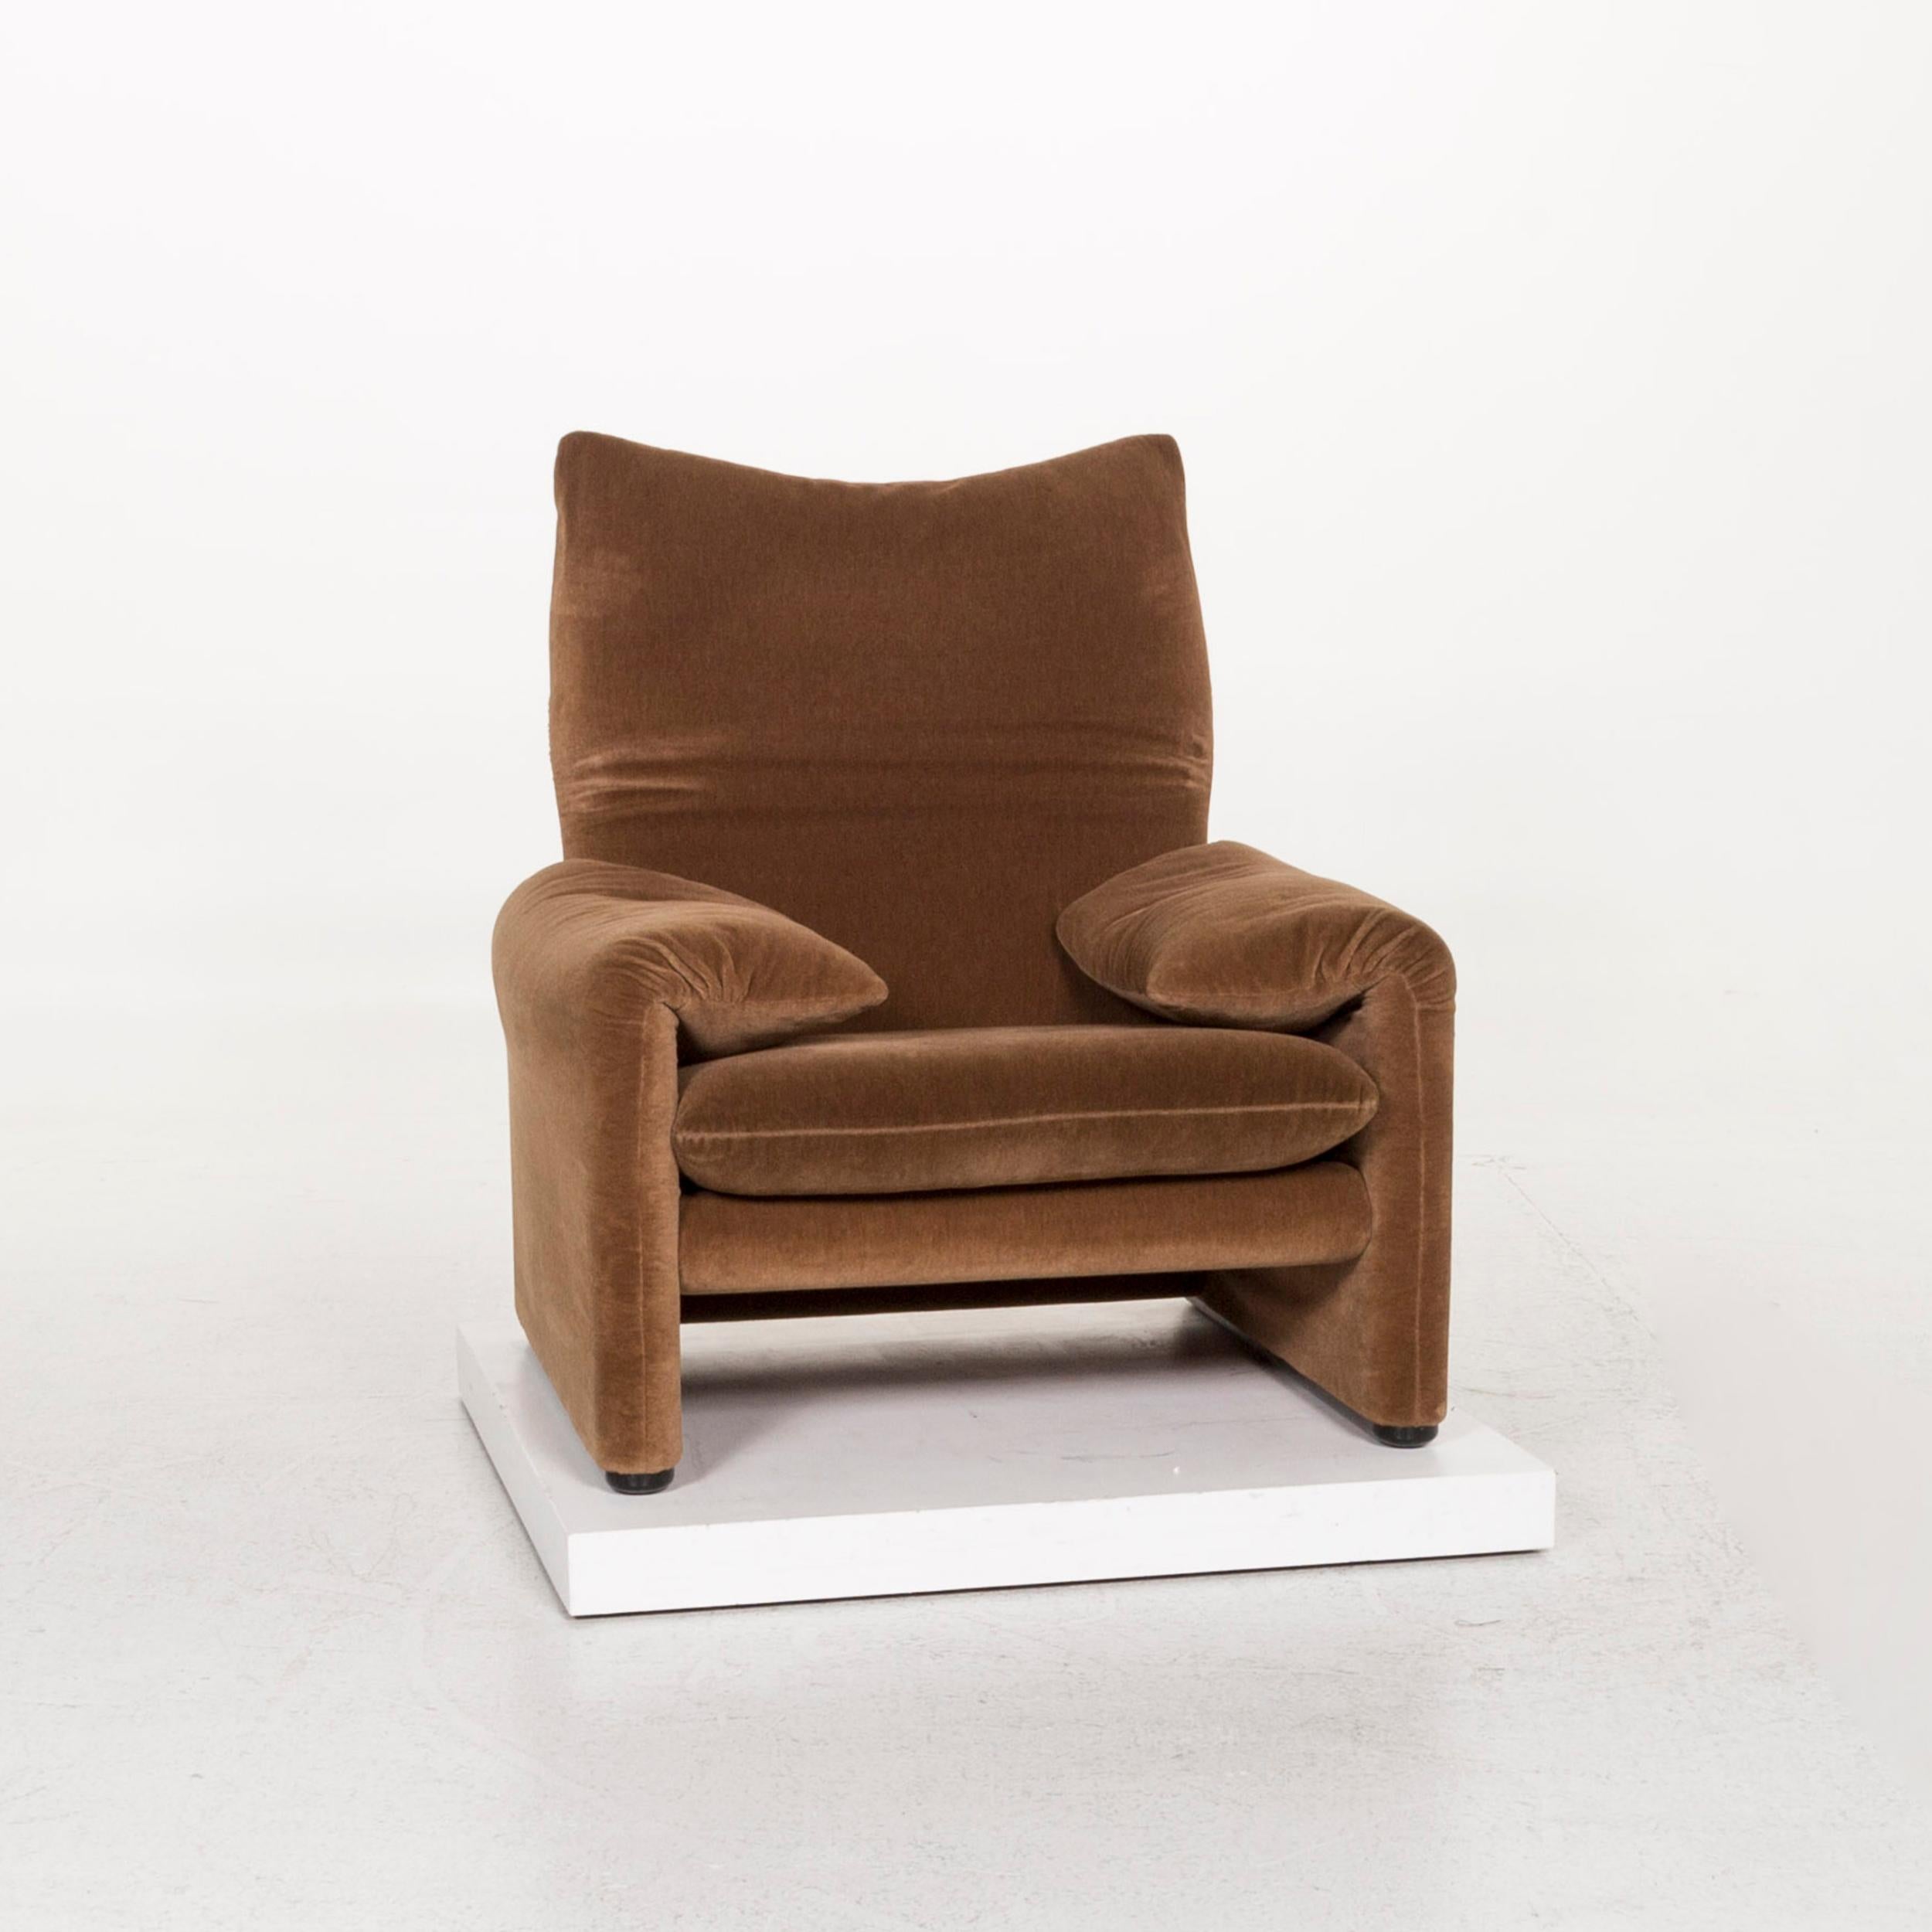 We bring to you a Cassina Maralunga fabric armchair brown function.

 

 Product measurements in centimeters:
 

Depth 84
Width 98
Height 68
Seat-height 42
Rest-height 55
Seat-depth 50
Seat-width 45
Back-height 26